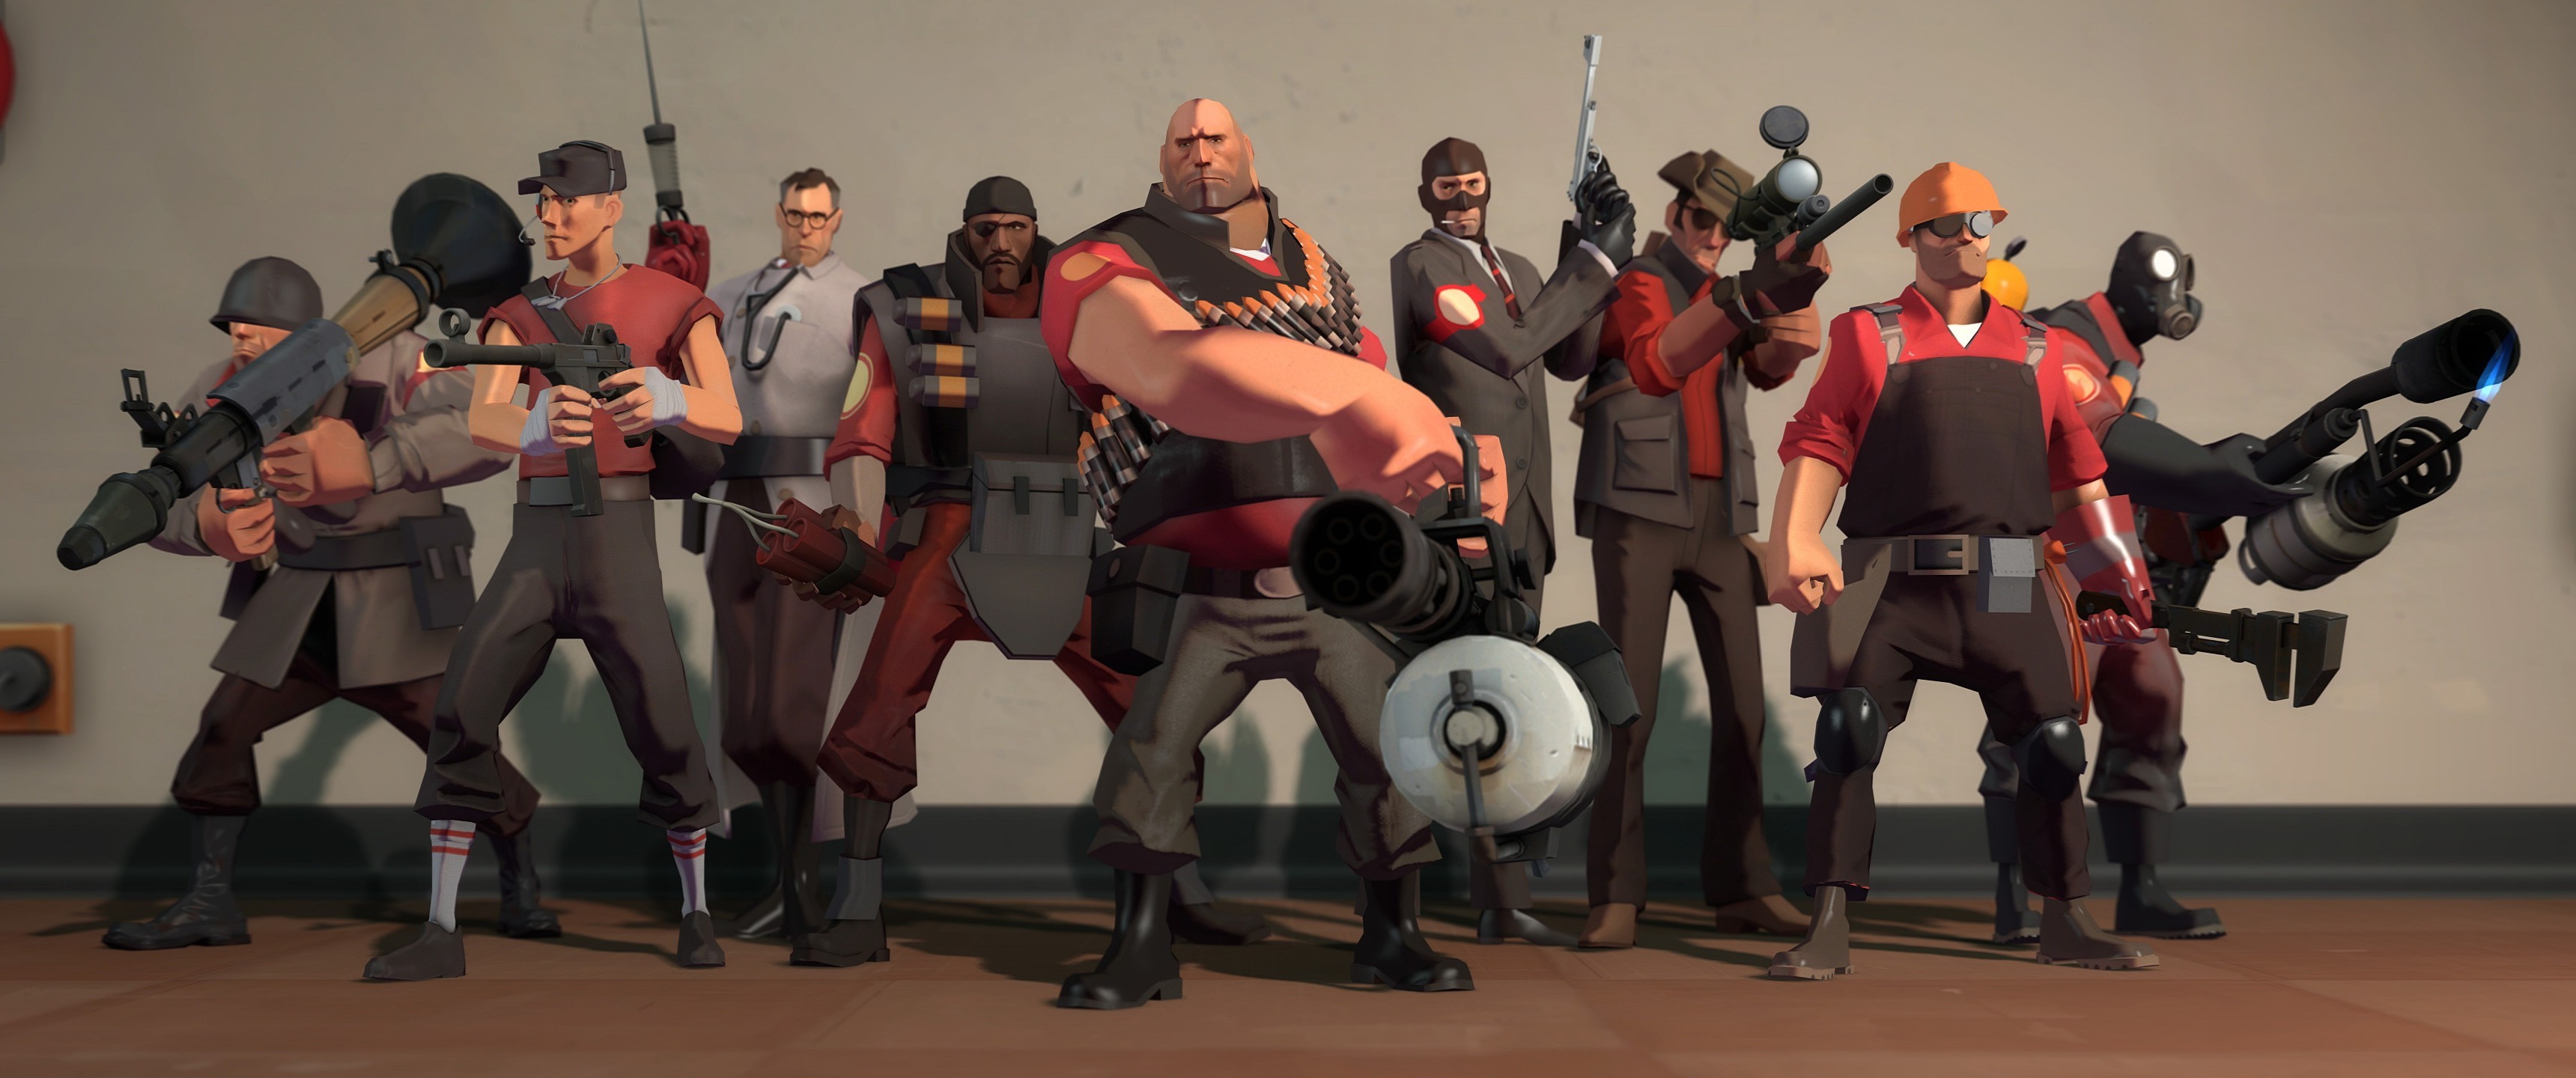 5120x1440p 329 team fortress 2 backgrounds